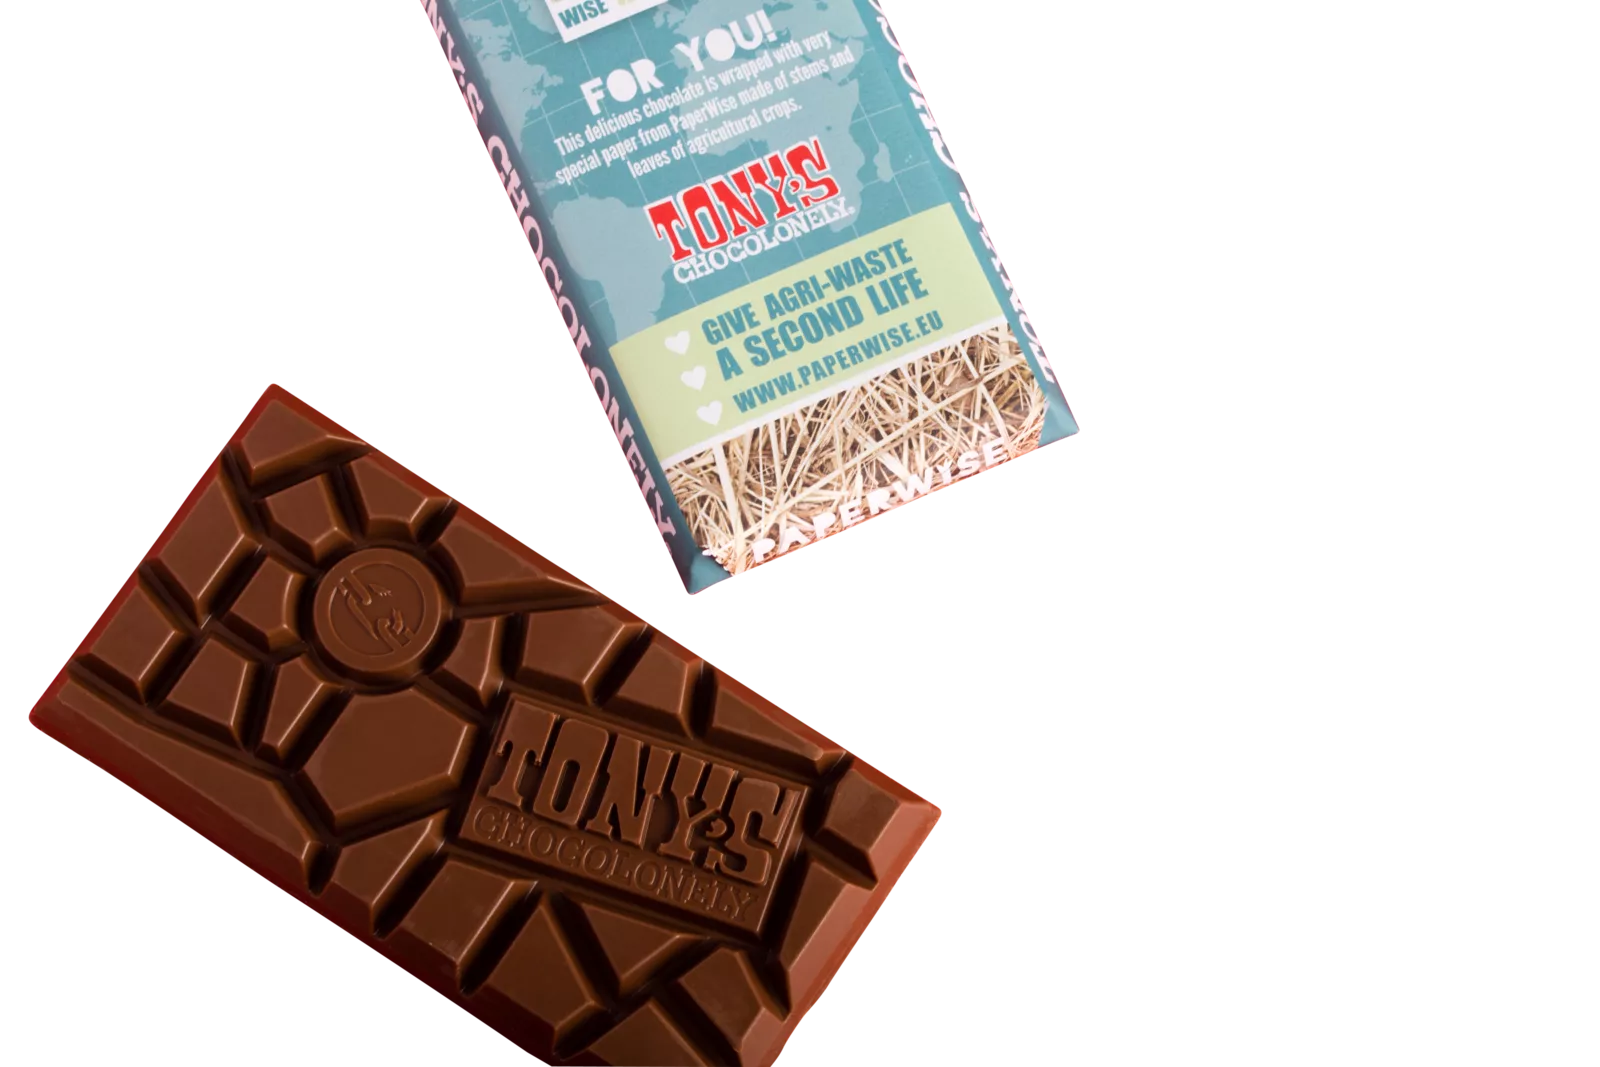 PaperWise eco organic packaging sustainable paper board food wrapping wrappingpaper chocolate TonysChocolonely c